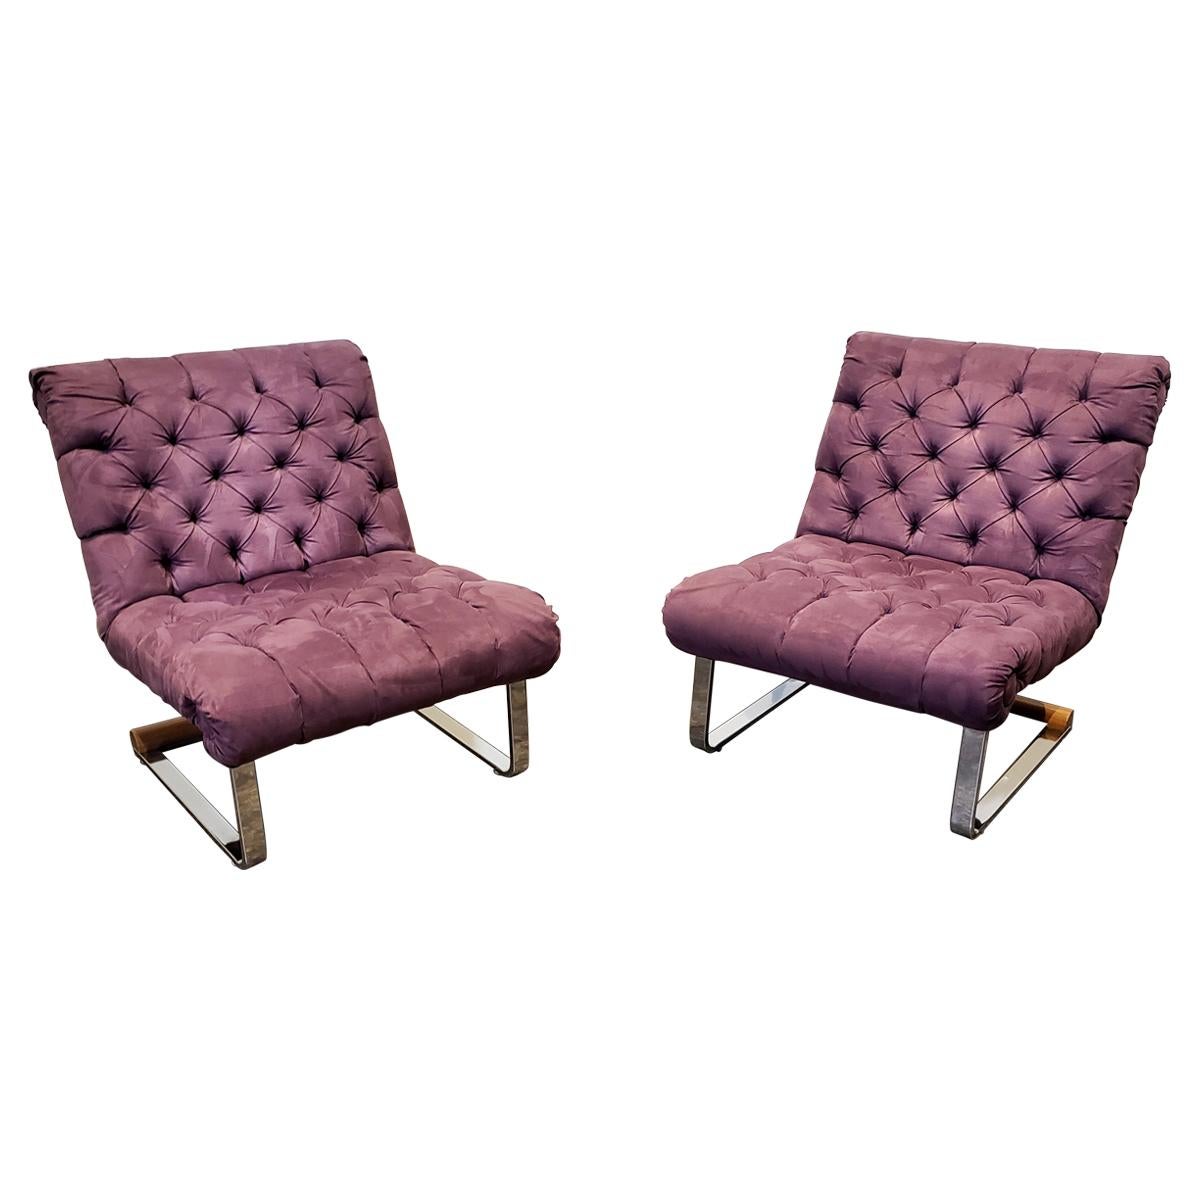 Milo Baughman Style Cantilever Lounge Slipper Chairs, Pair For Sale